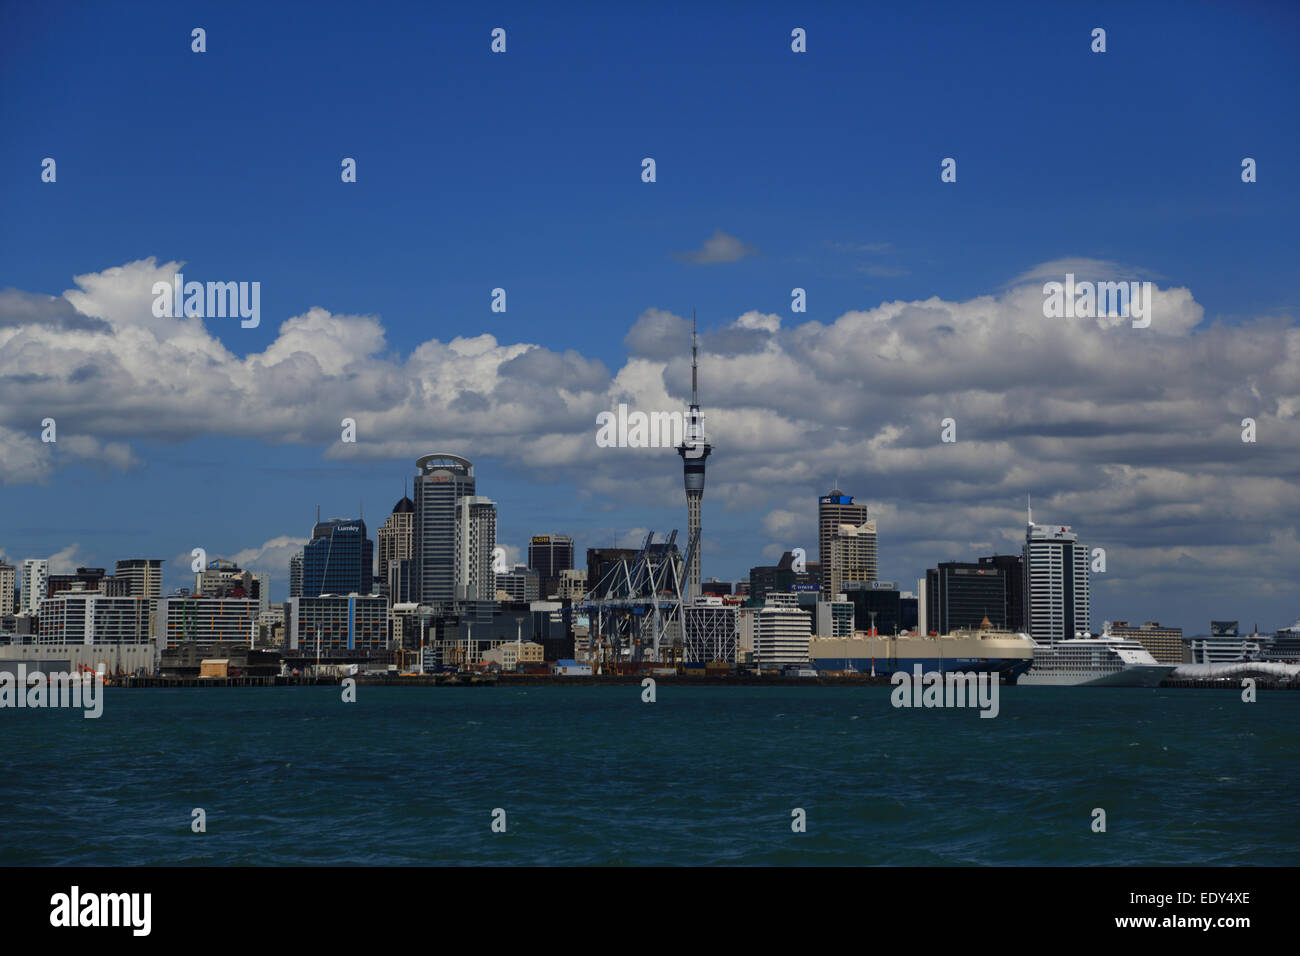 Auckland Port and skyline, Diamond Princess cruise ship and other shipping from Devenport Ferry, New Zealand Stock Photo